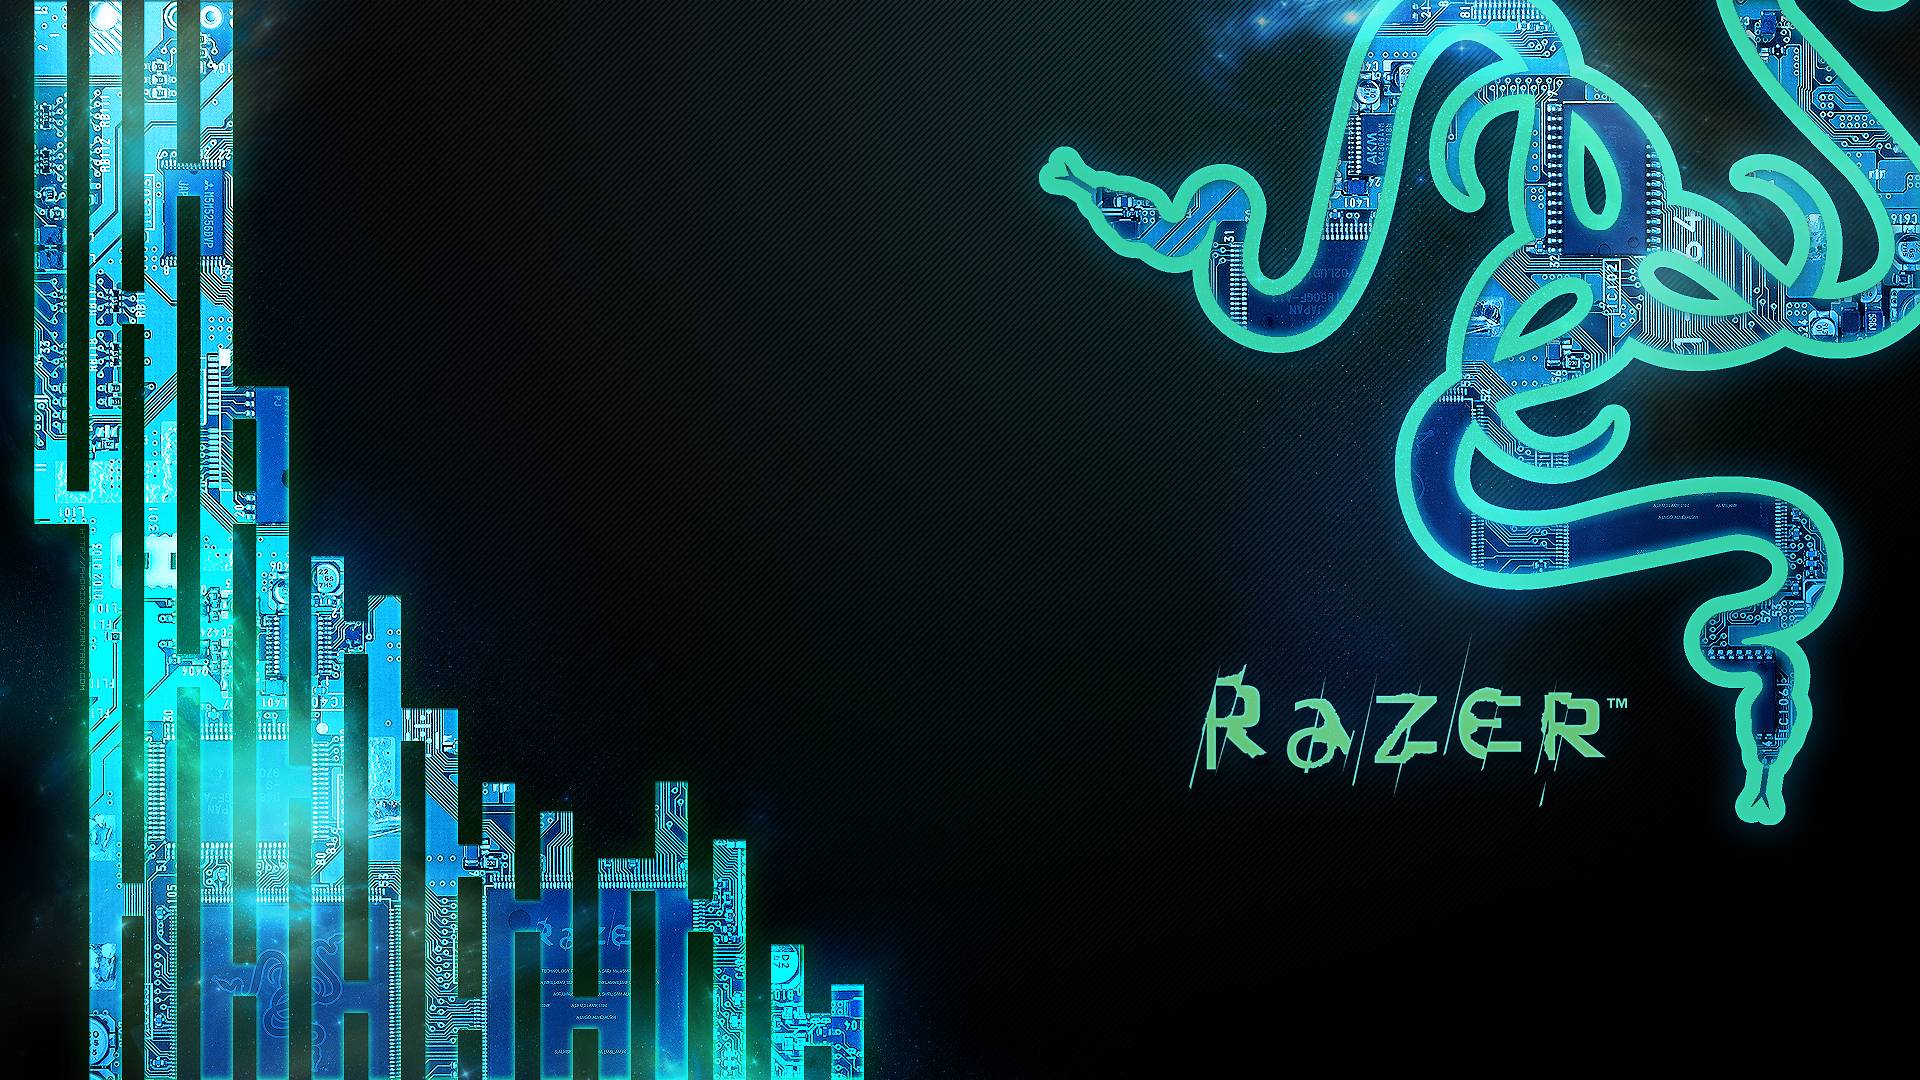 Razer Wallpaper 1920×1080. Best Reviews About Audio And Gadgets